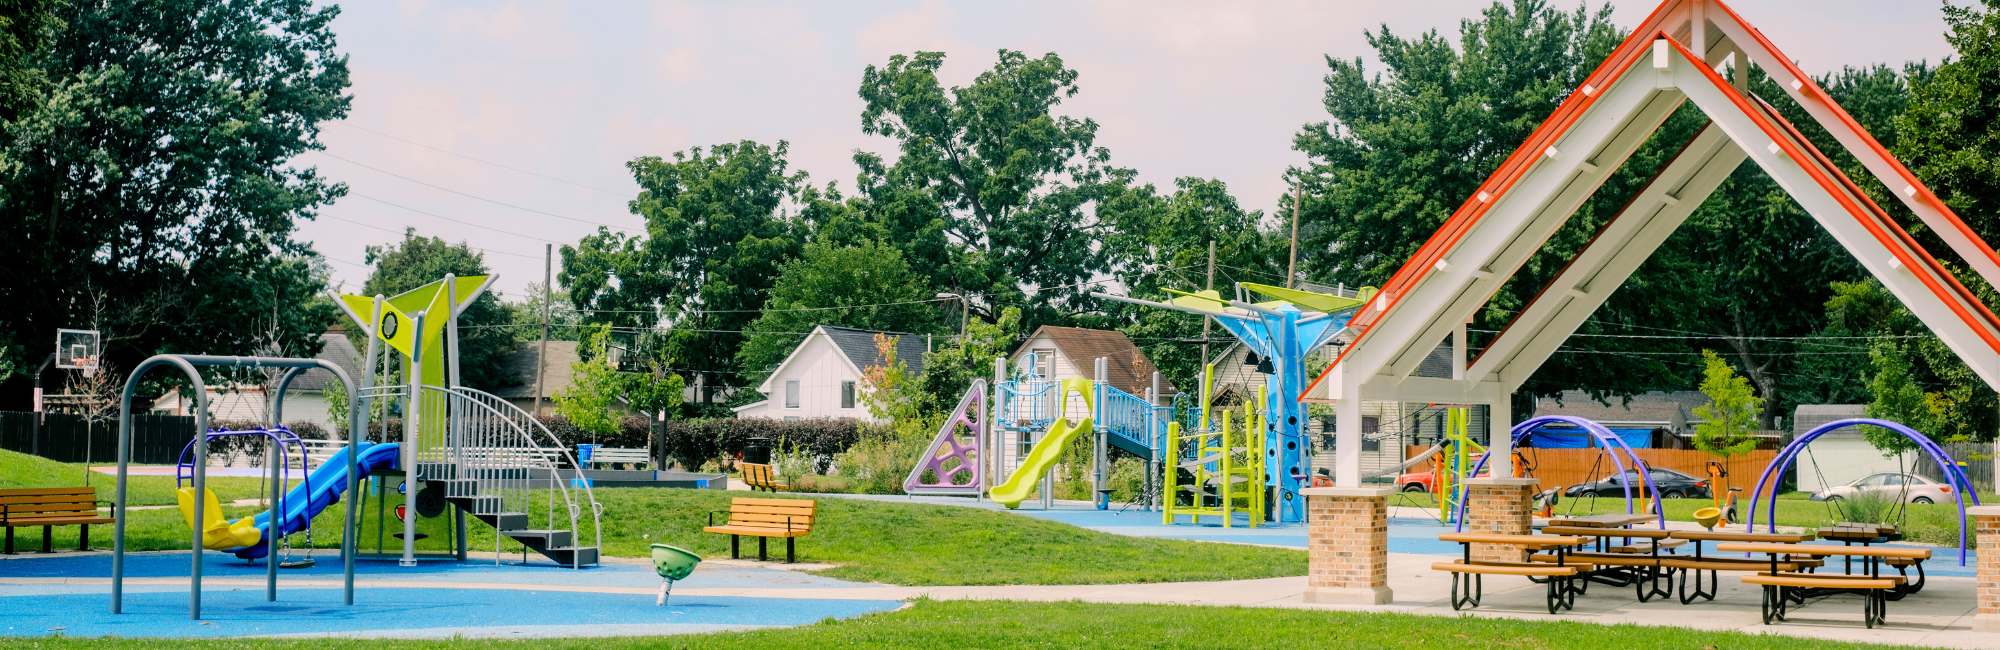 Park with a vibrant playground and shelter